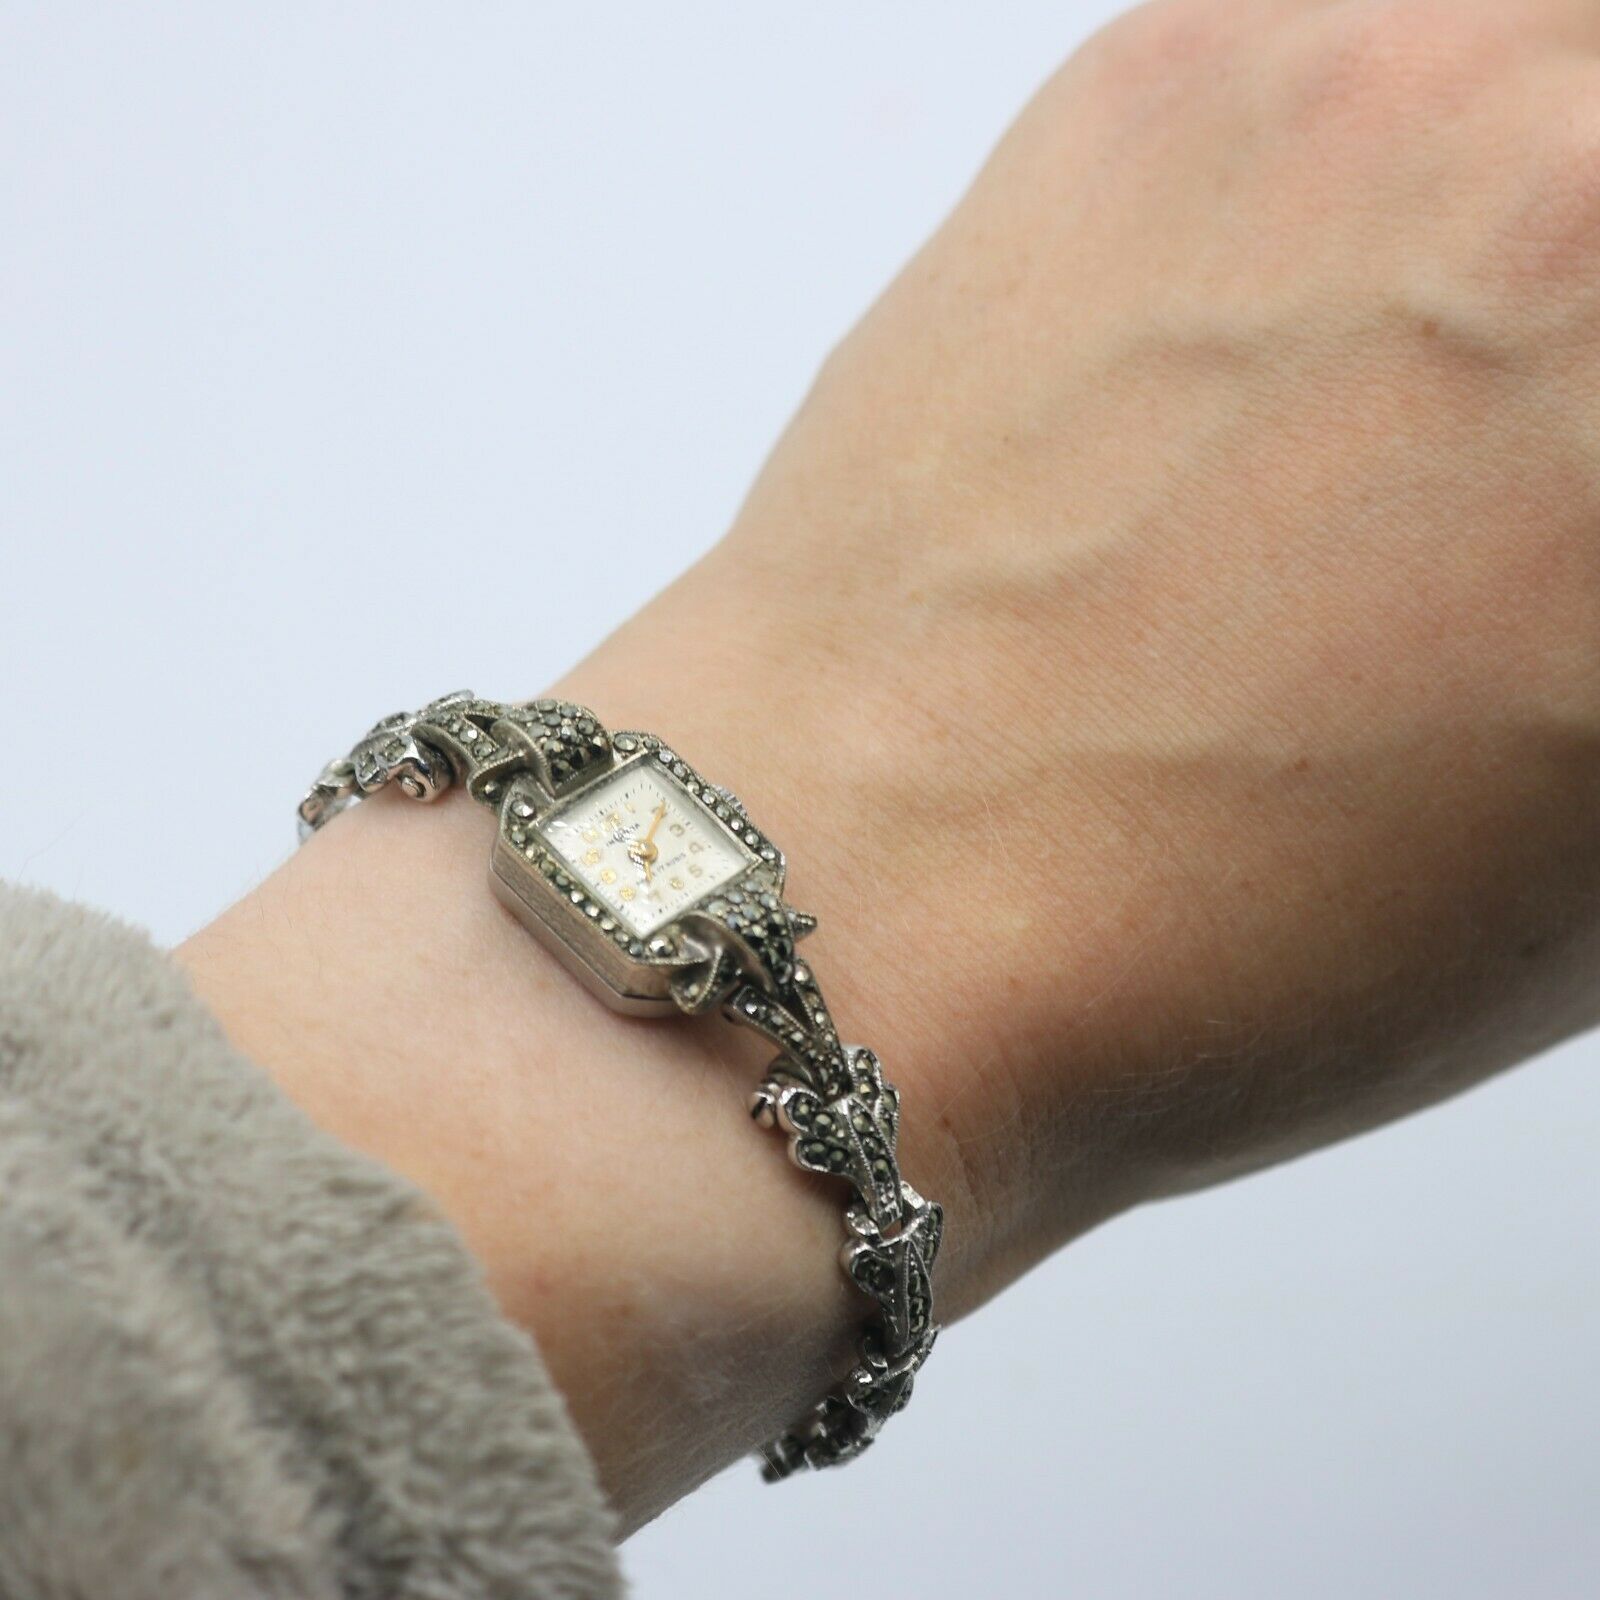 Silver Black Vintage Style Marcasite Crystal Oval Face Women's Bangle Cuff  Watch - Walmart.com